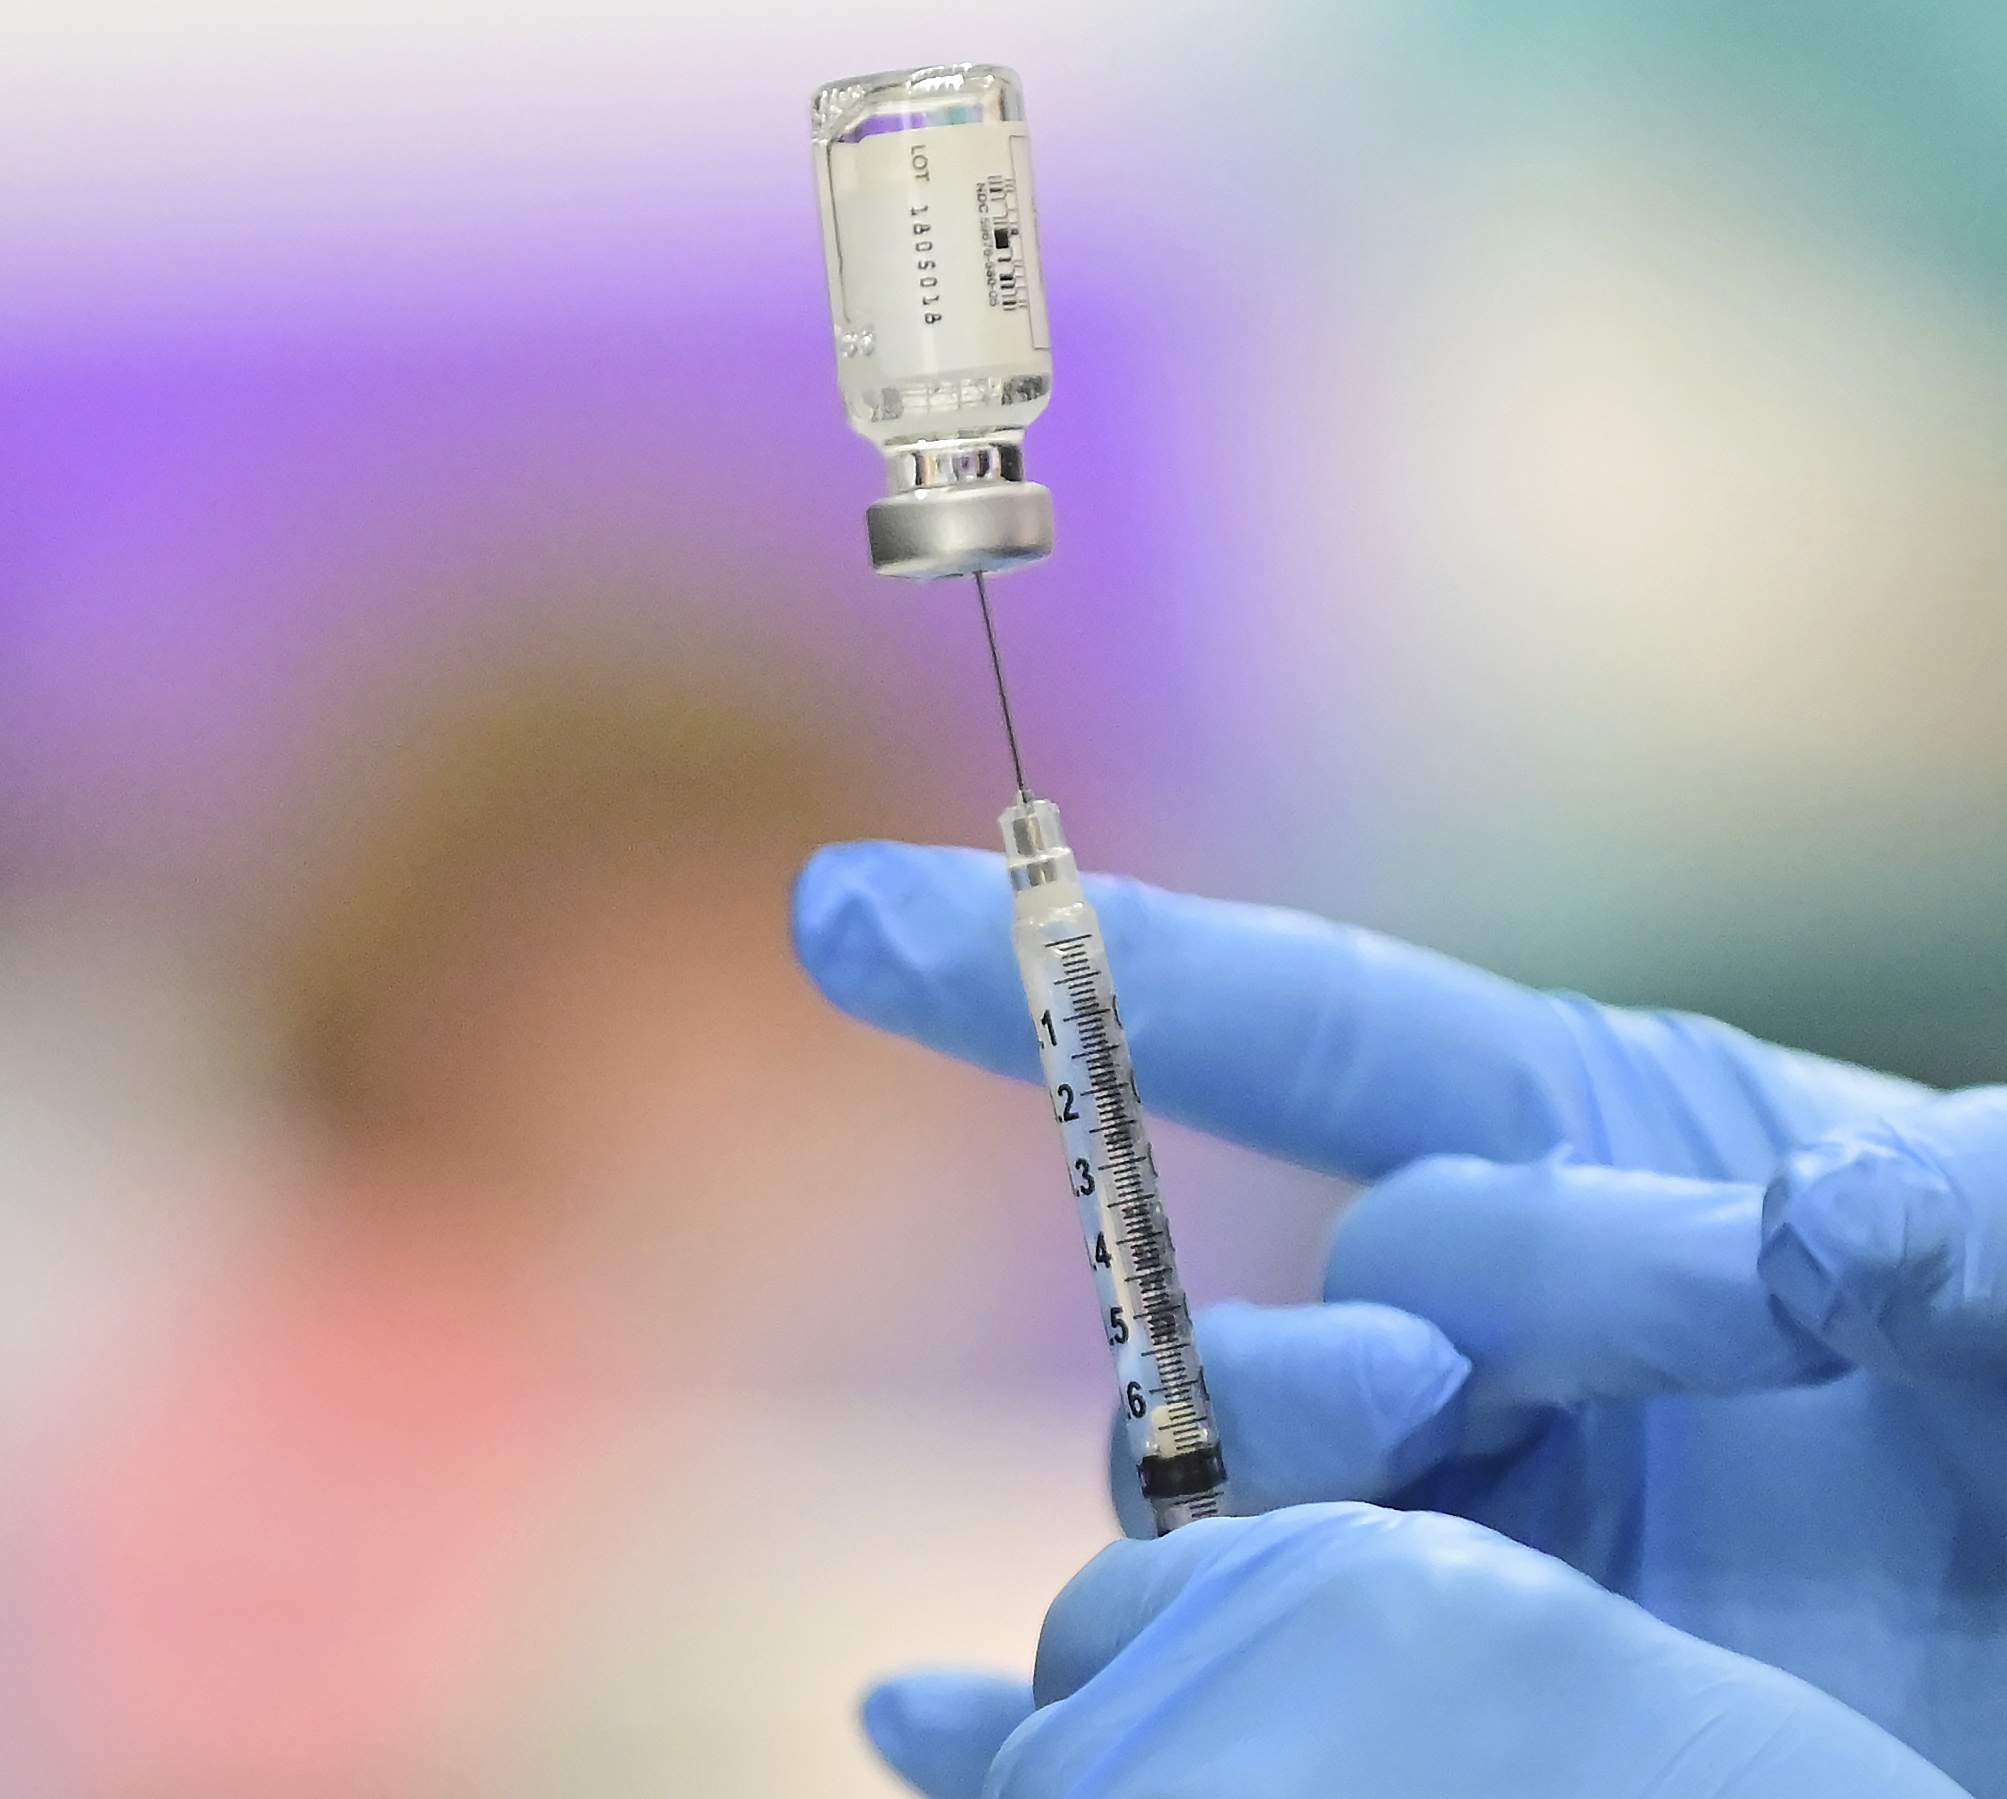 Florida gets unexpected shipment of 42,000 doses of J&J vaccine